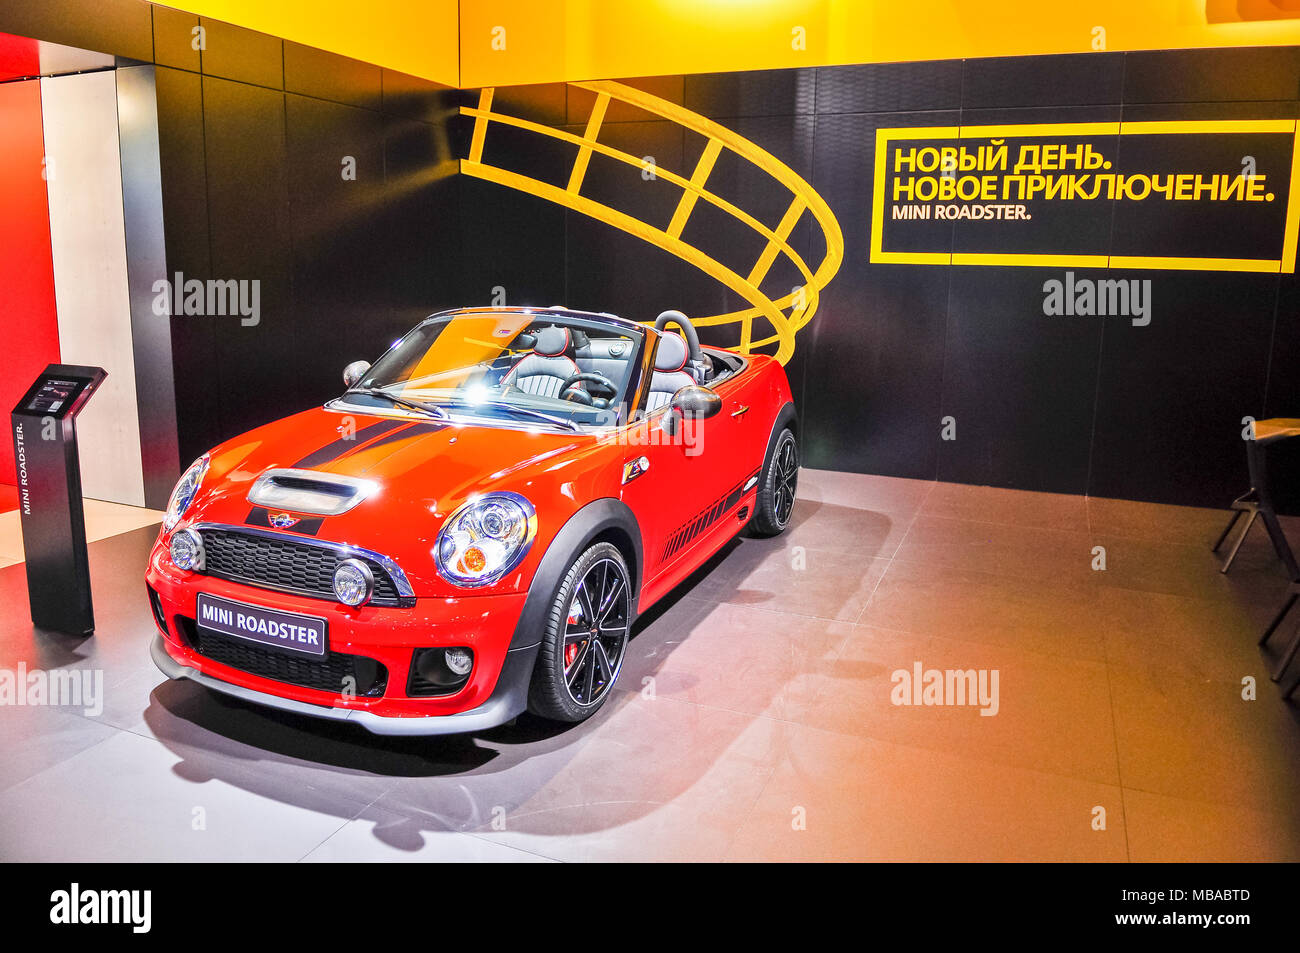 Russia, Moscow, Expocentre, 29 August - 9 September 2012: Mini Roadster at 4th Moscow International Automobile Salon (MIAS 2012) Stock Photo